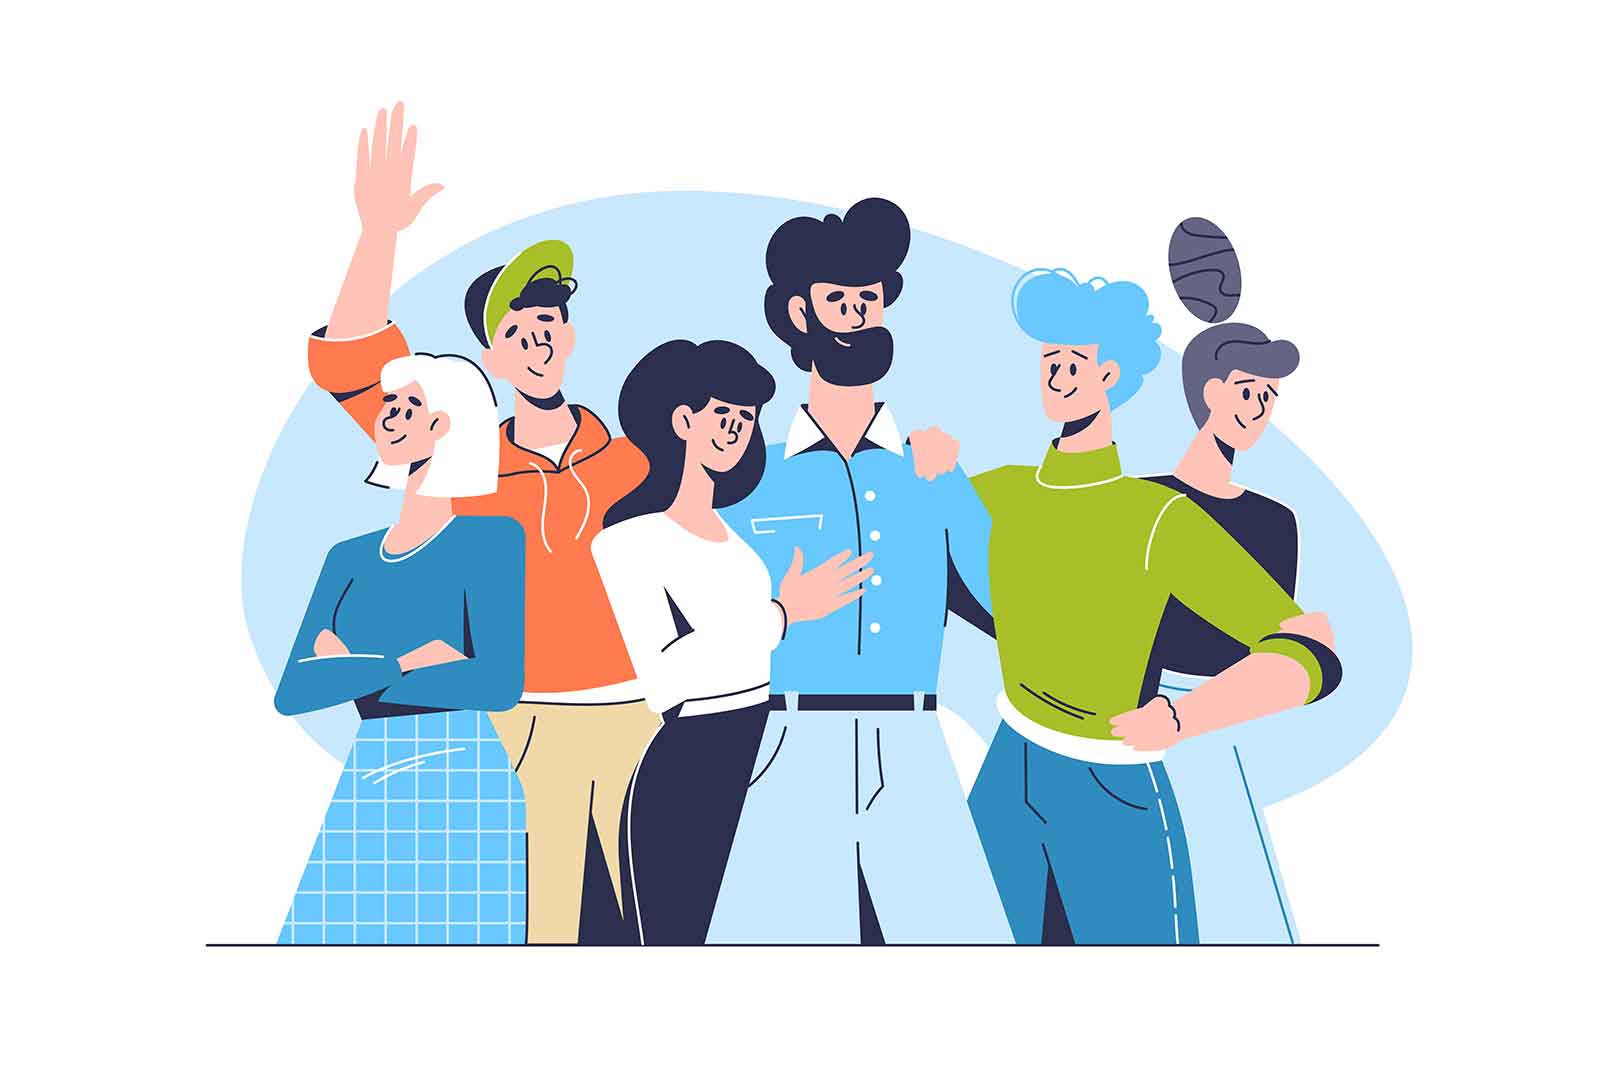 Group of happy people gathered together, vector illustration. Community concept.